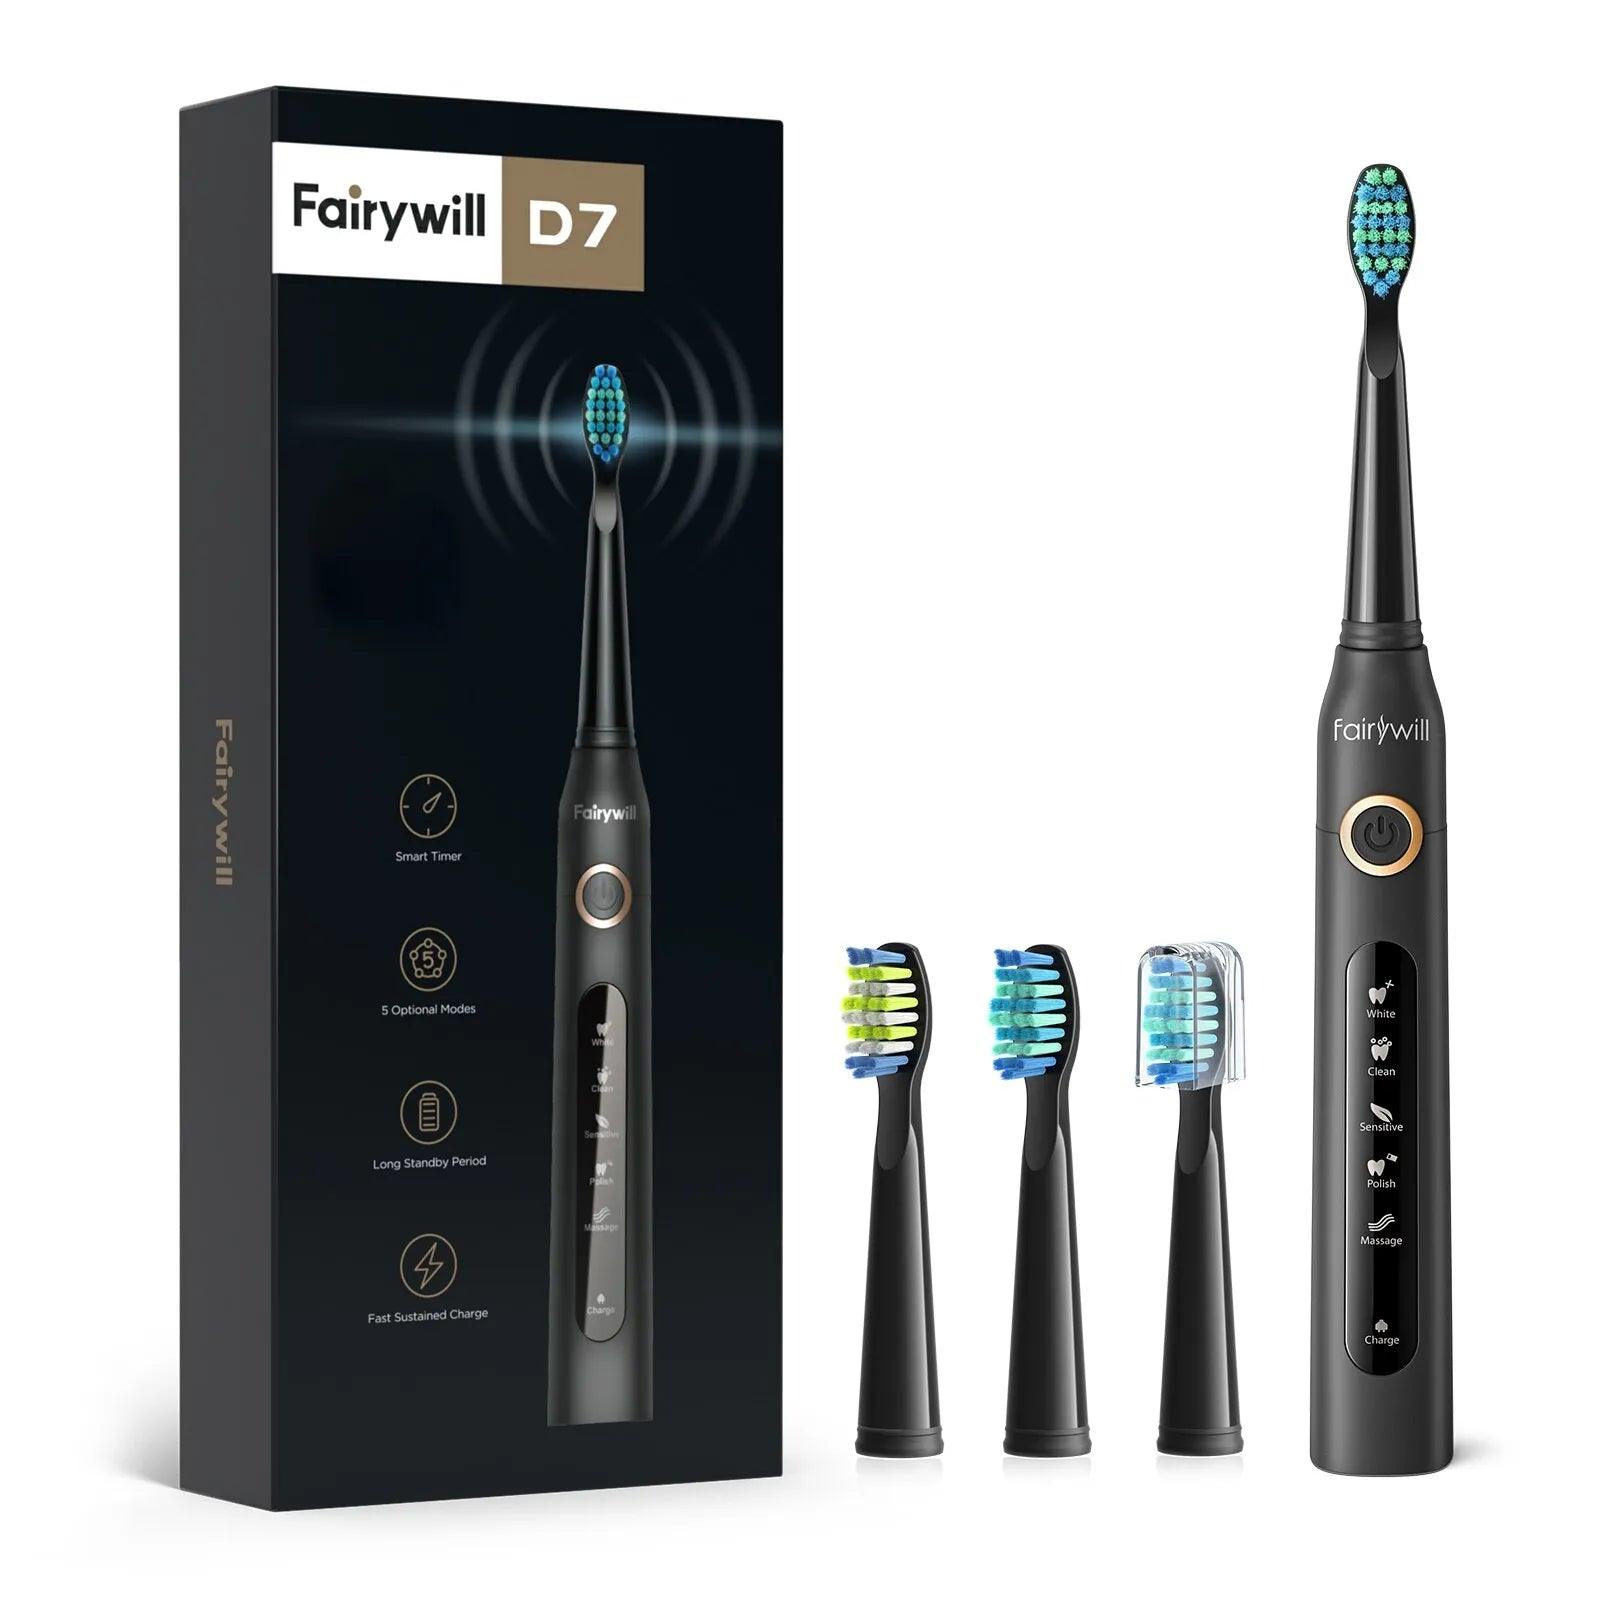 Advanced Sonic Electric Toothbrush with USB Charging - Replaces Manual Brush Strokes - 5 Cleaning Modes & Replacement Heads included  ourlum.com   